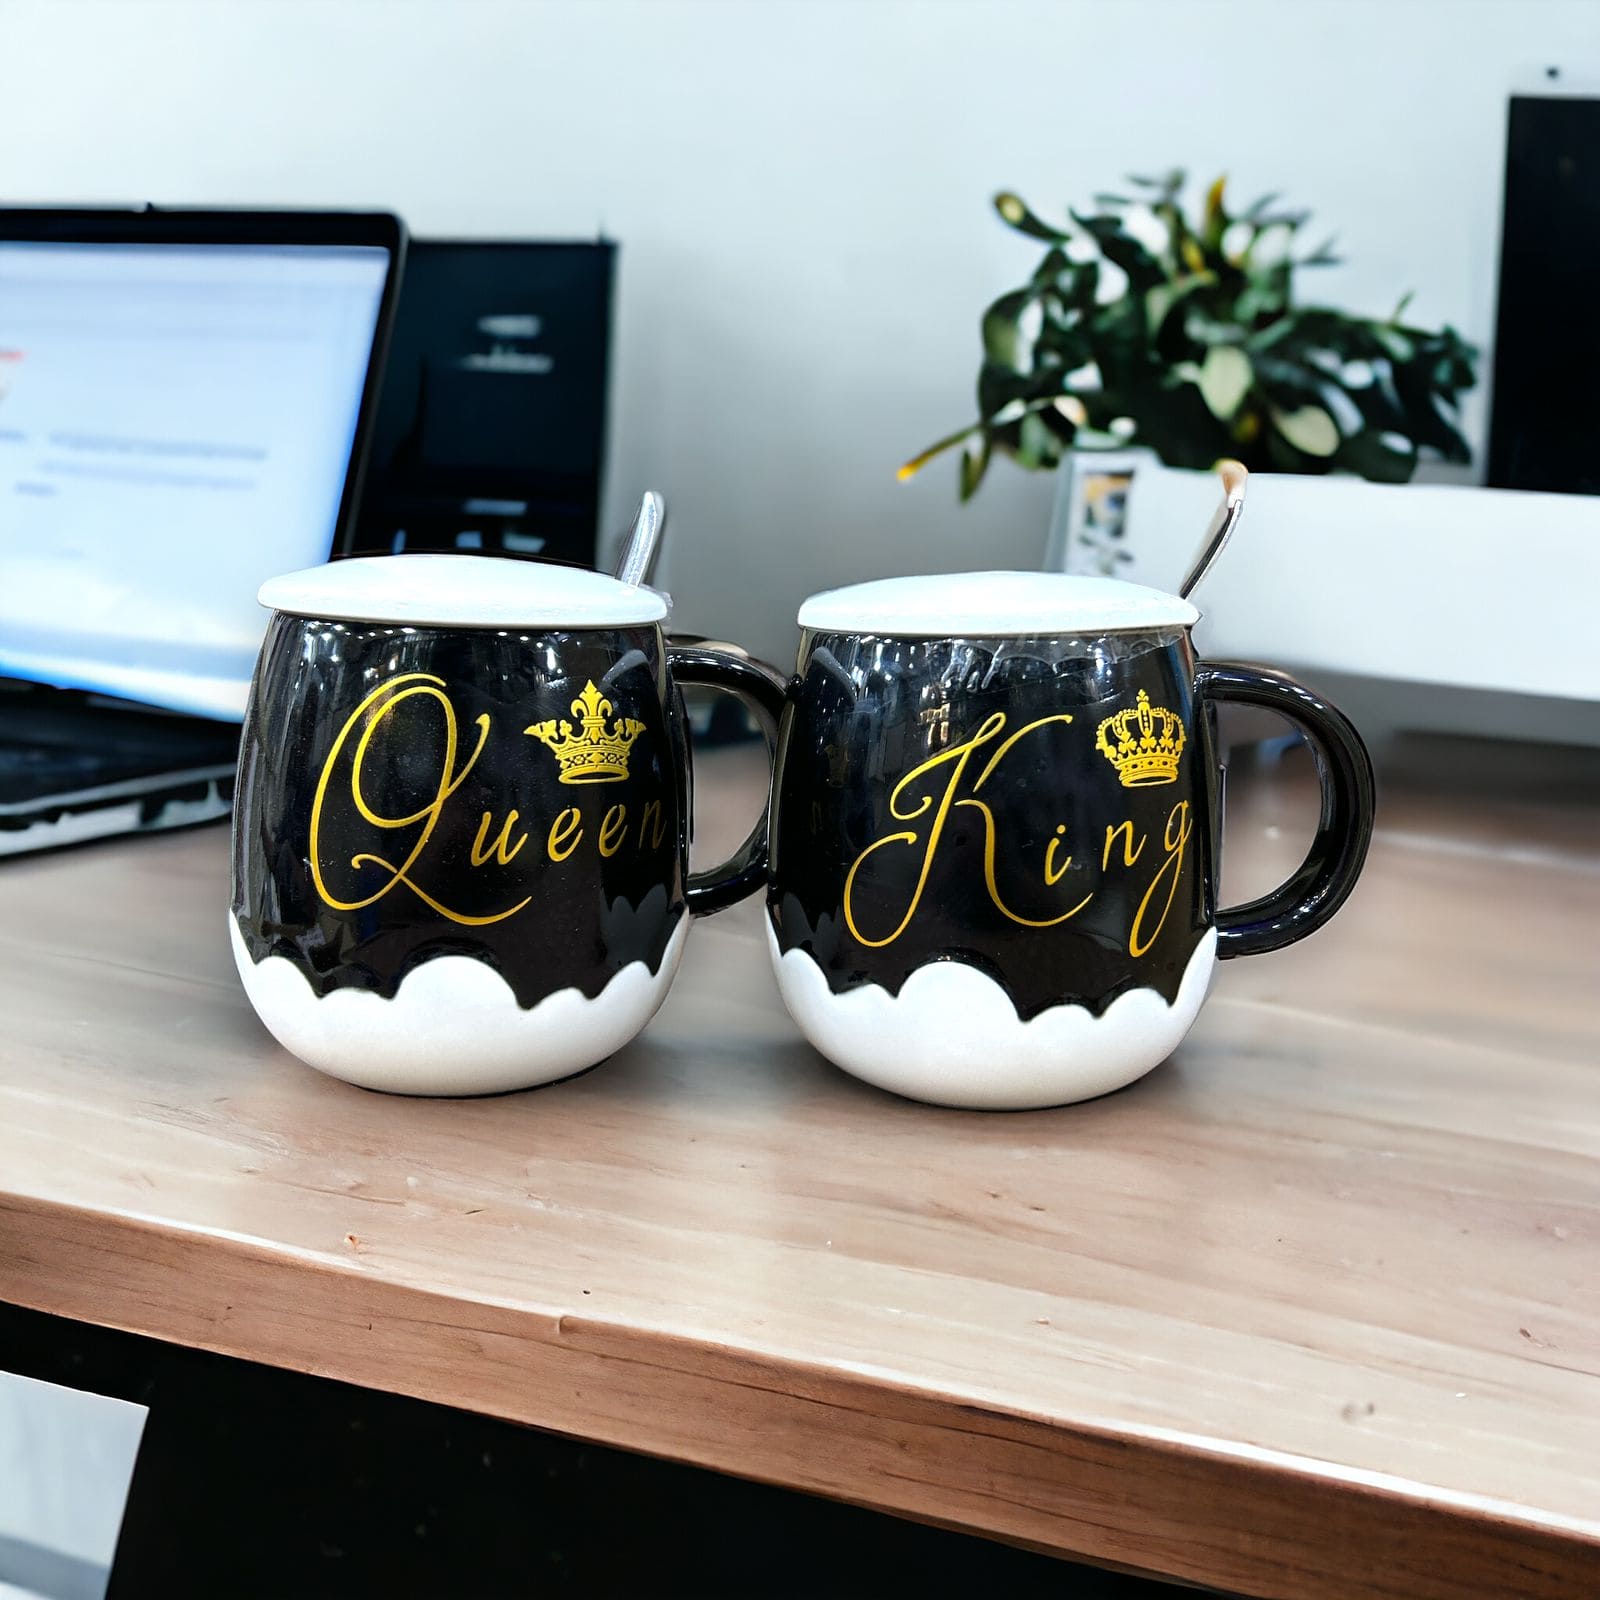 Black And White King Queen Mug, Ceramic King Queen Mugs With Lids And Spoons, King and Queen Camping Ceramic Coffee Mugs, Ceramic Water Coffee Mug